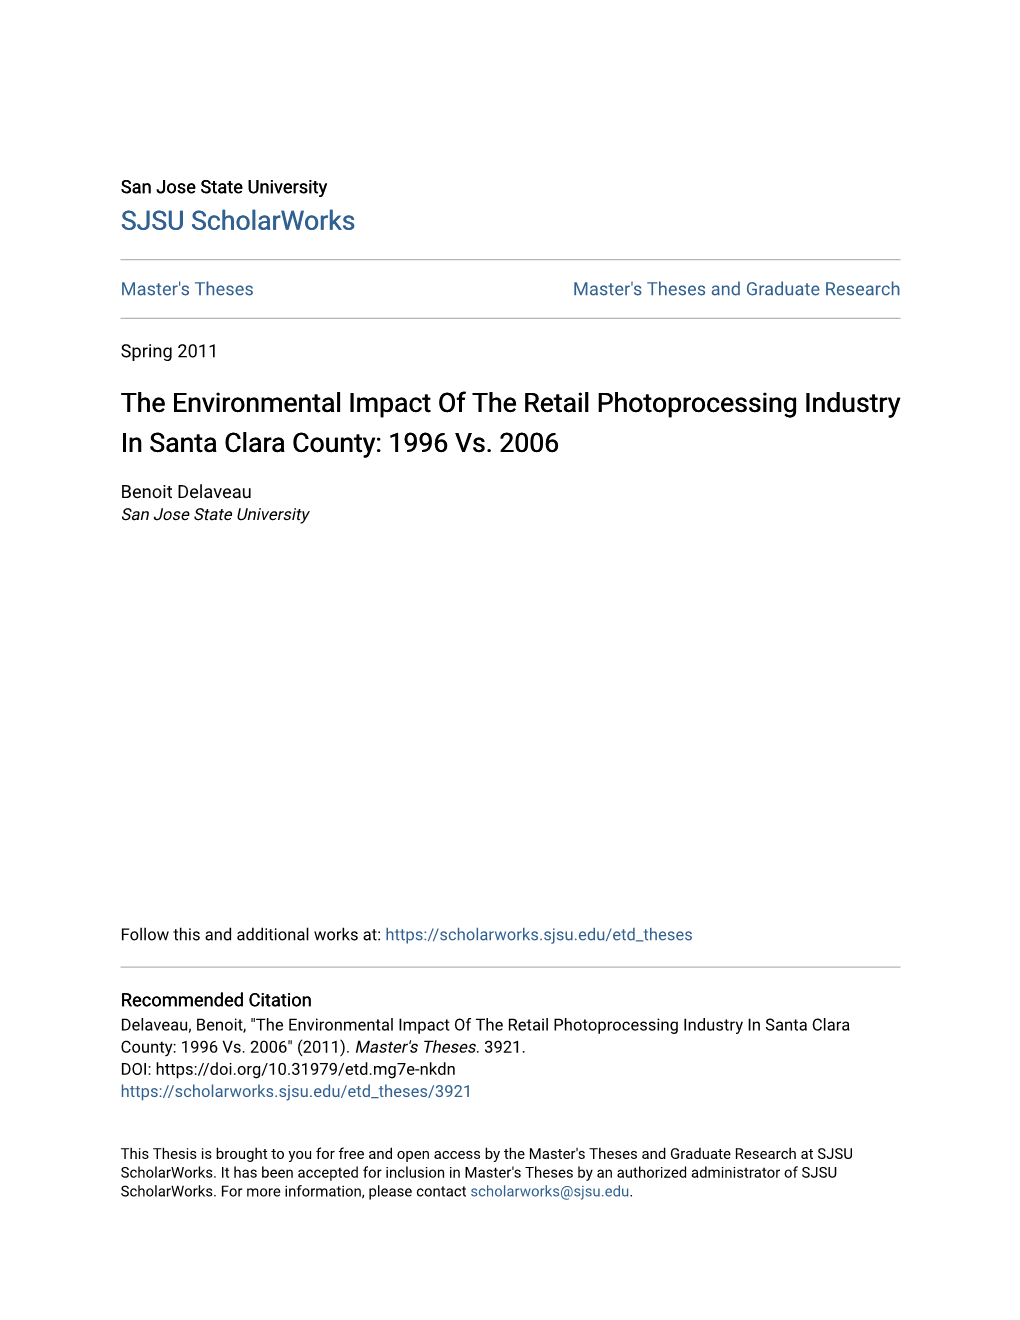 The Environmental Impact of the Retail Photoprocessing Industry in Santa Clara County: 1996 Vs